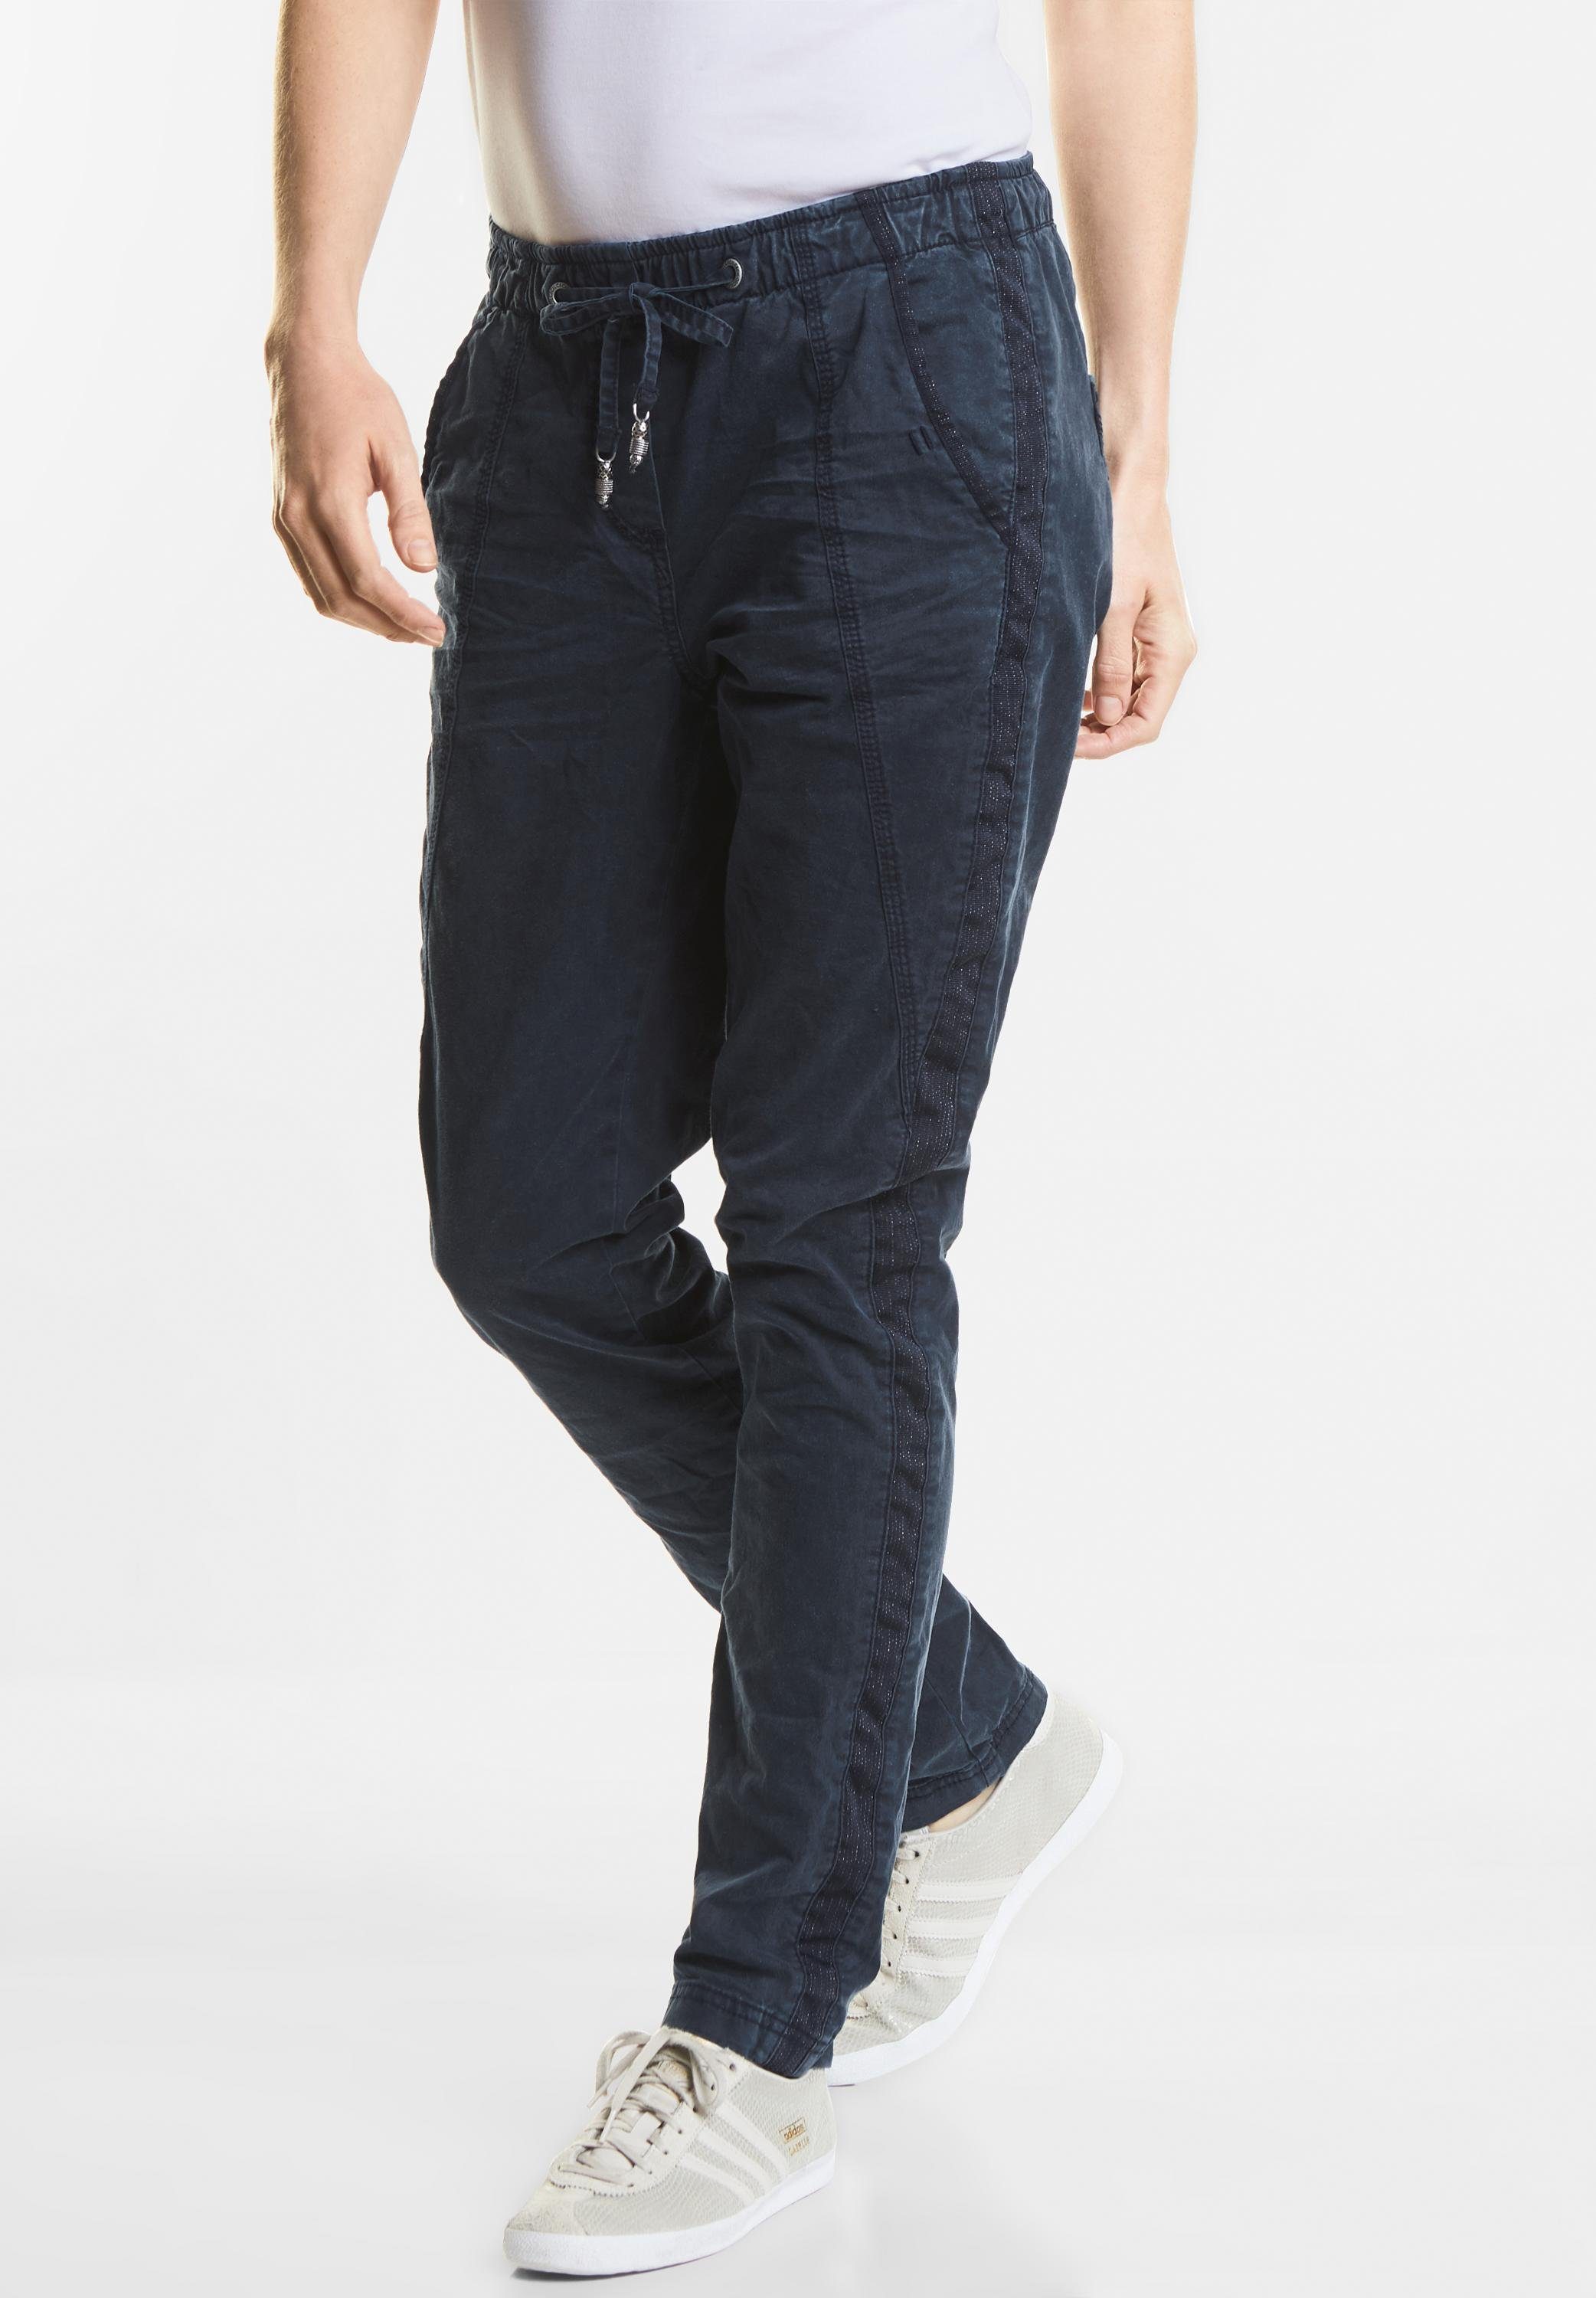 Otto - Cecil NU 15% KORTING: CECIL Casual broek Chelsea